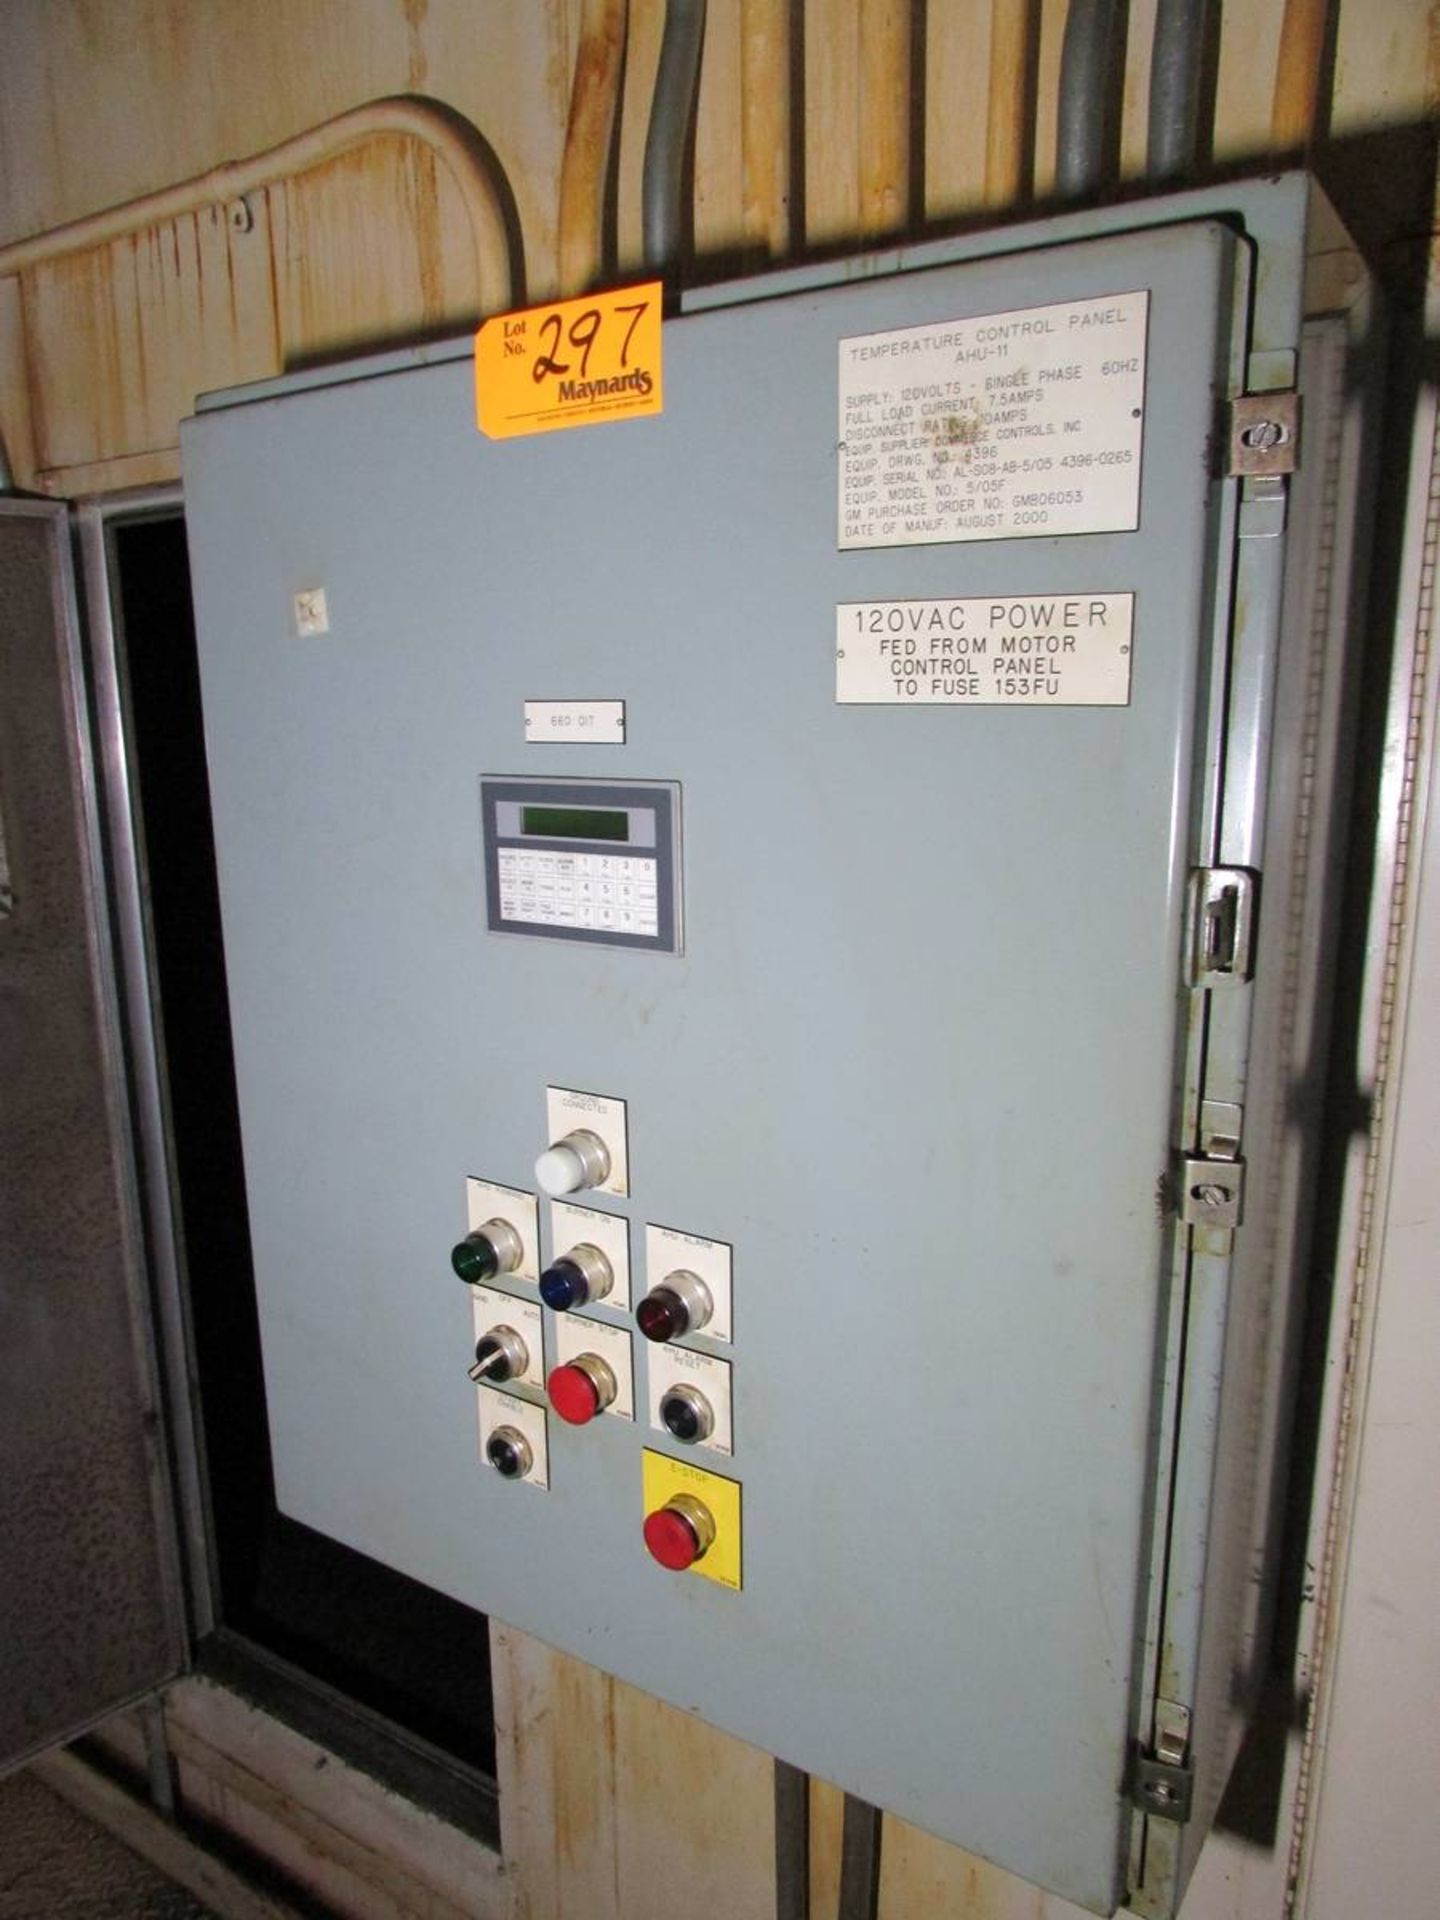 2000 Webco CUS-35 Overhead Air Handling Unit - Image 15 of 17